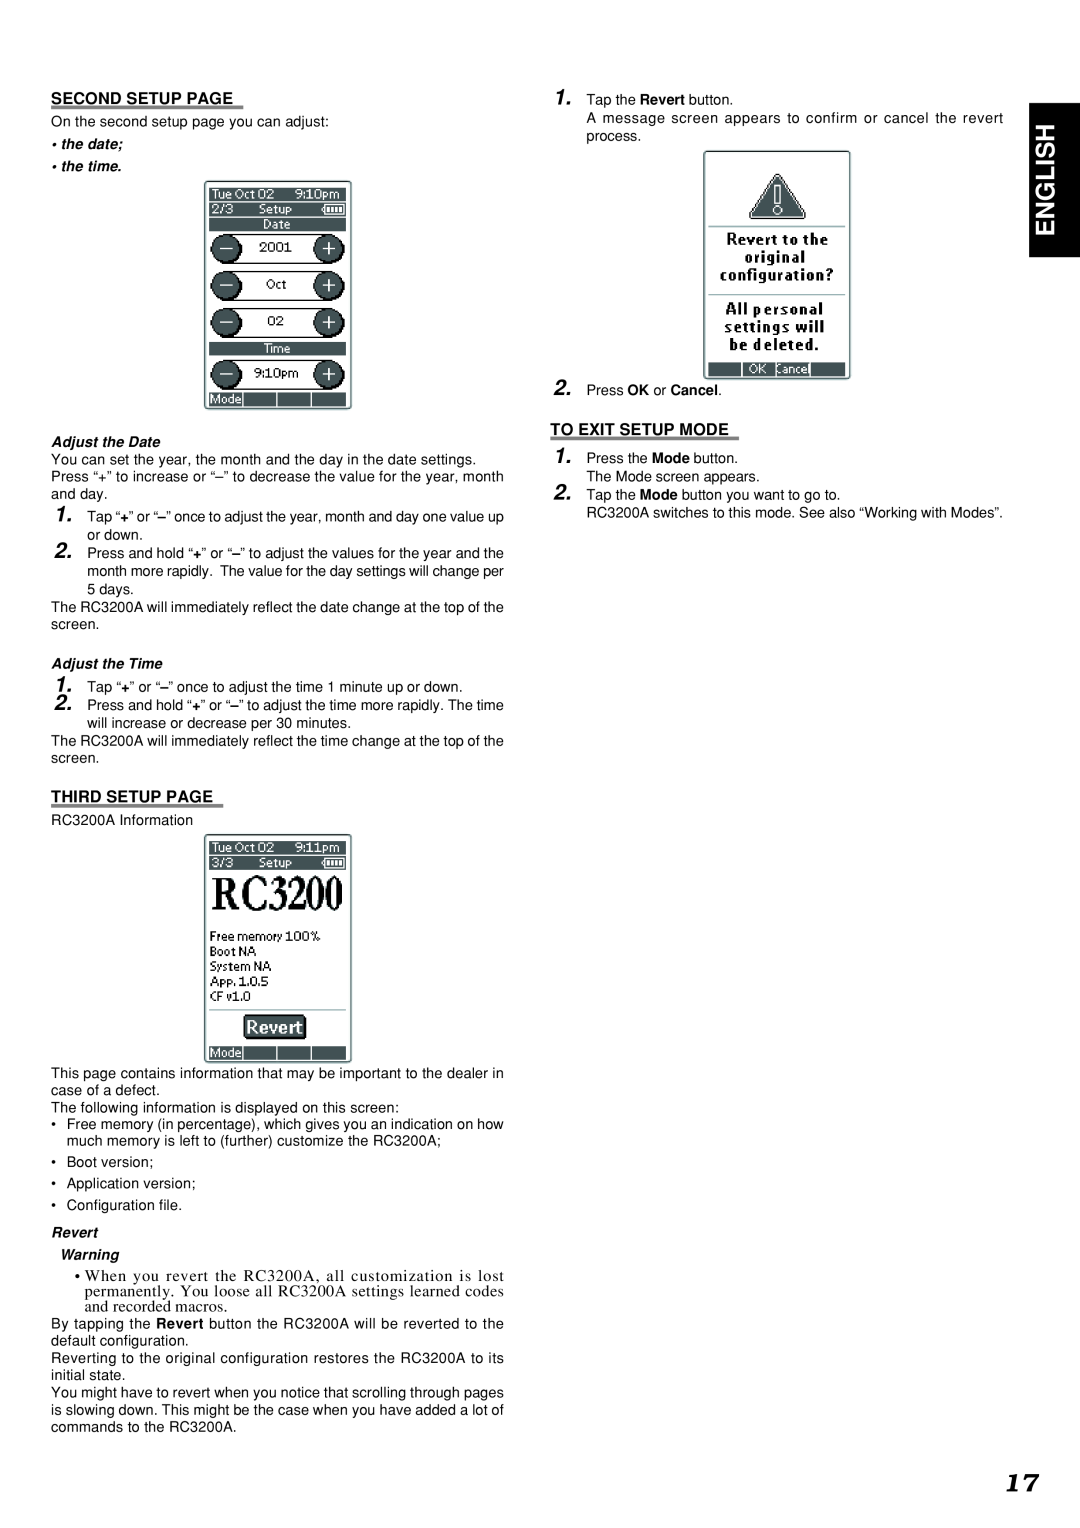 Marantz SR9300 English, Second Setup Page, Third Setup Page, To Exit Setup Mode, •the date •the time, Adjust the Date 